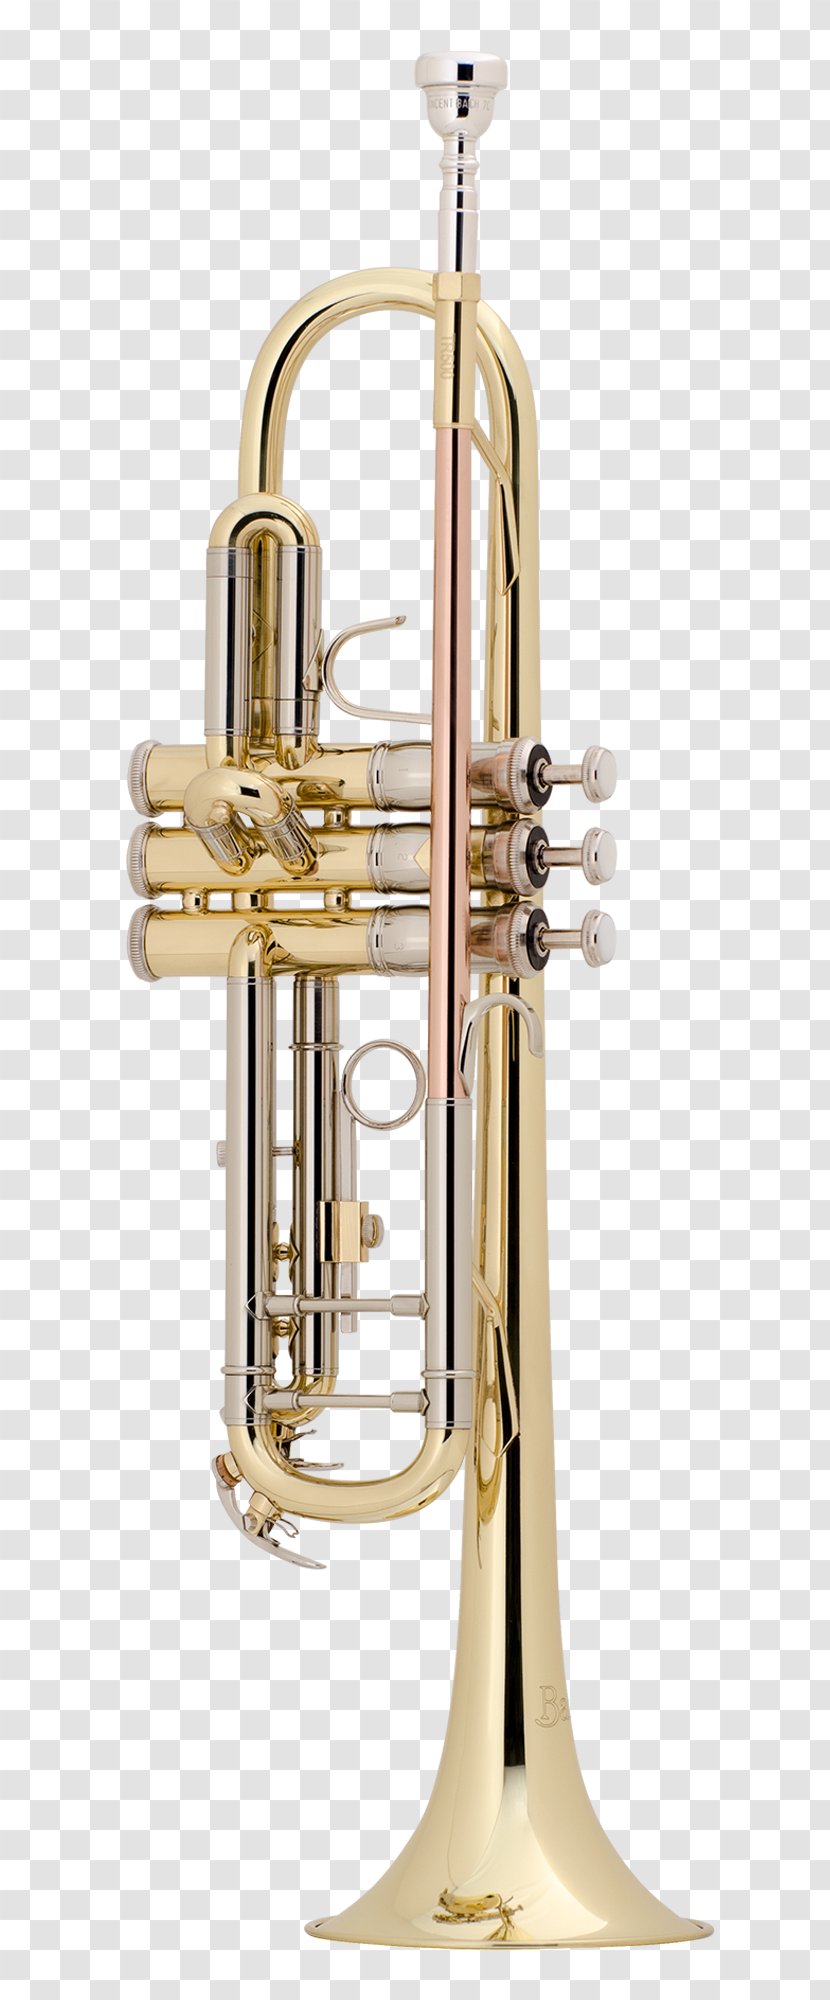 Trumpet Musical Instruments Vincent Bach Corporation Brass Mouthpiece - Silhouette - And Saxophone Transparent PNG